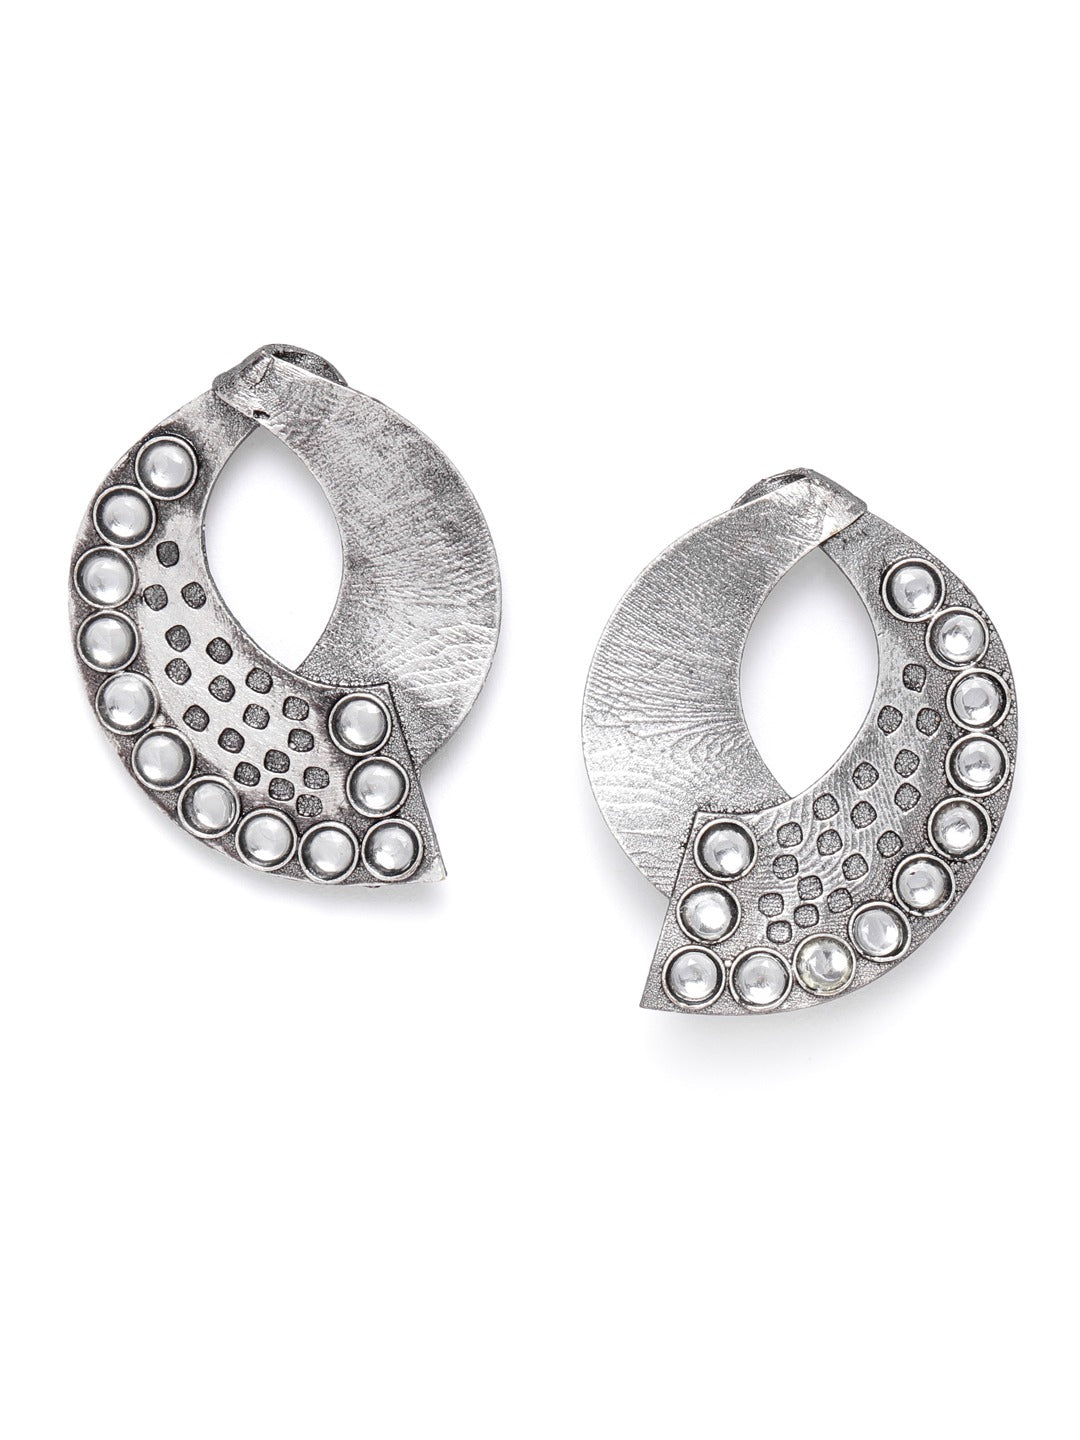 Oxidised Silver-Plated Stone studded Drop earrings